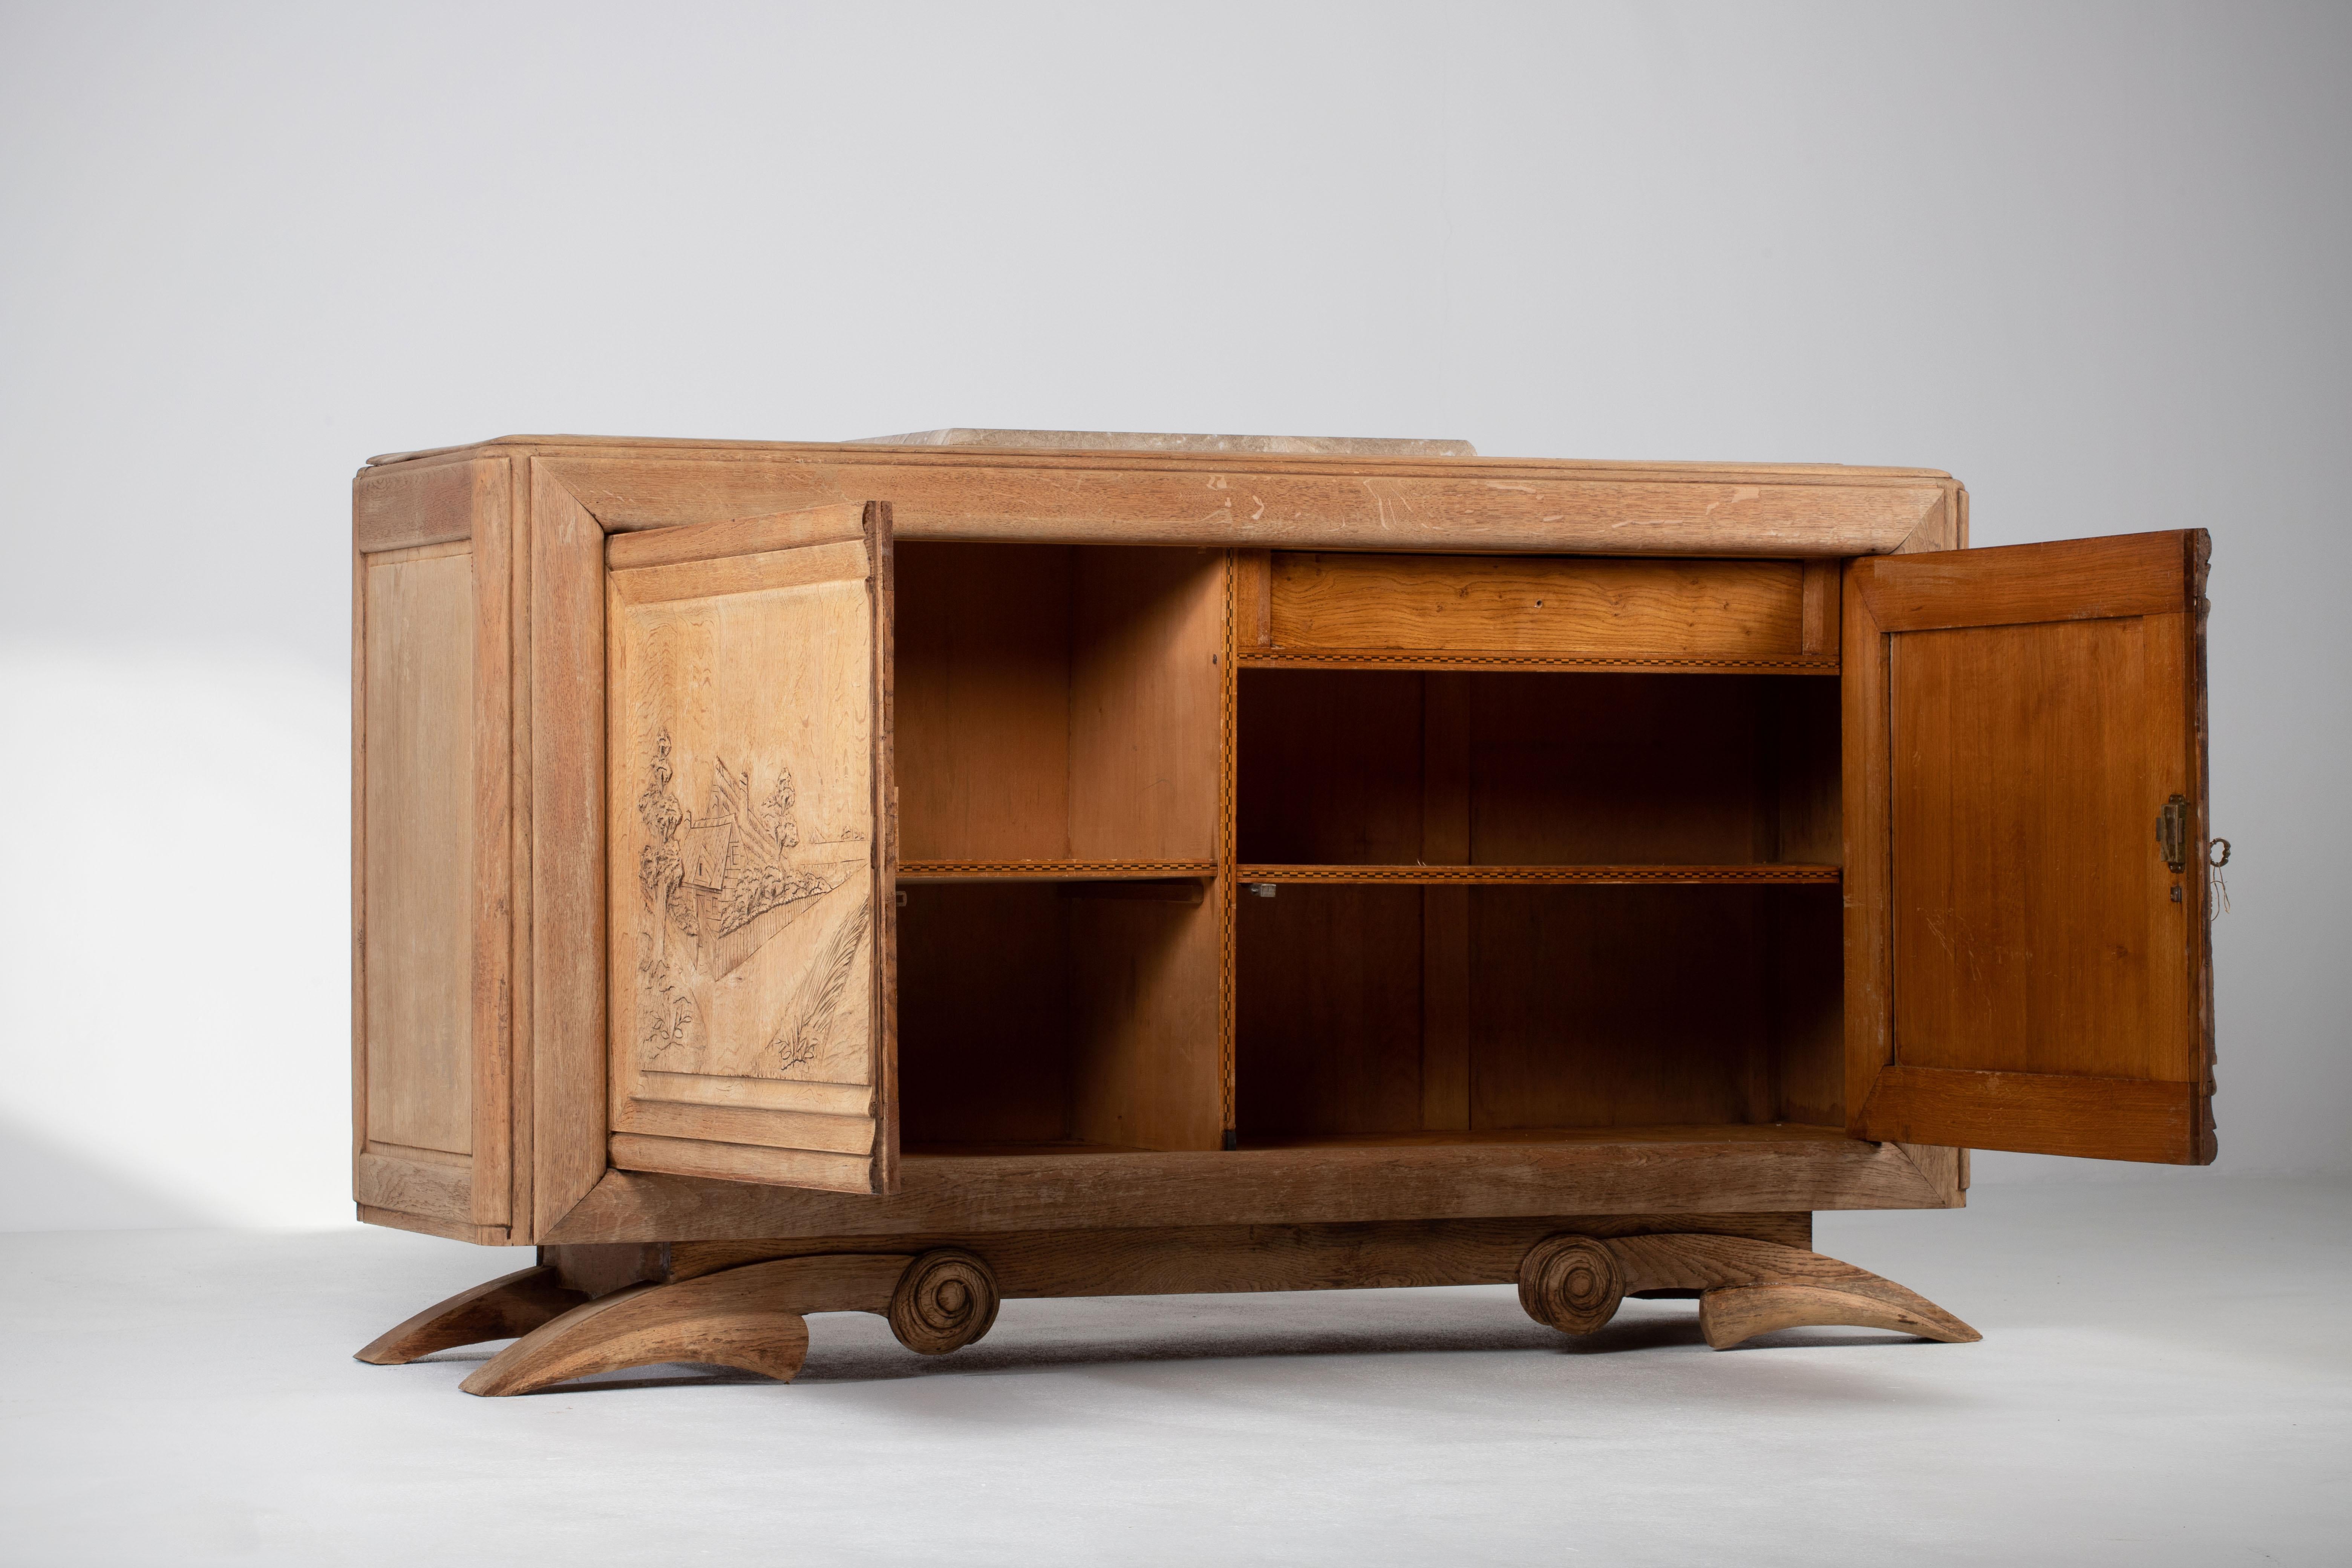 Credenza, solid oak, France, 1940s.
Large Art Deco Brutalist sideboard. 

This model was inspired the by the French duo Andre Domin and Marcel Genevriere, better known as Dominique's sideboard exhibited at the 'Exposition coloniale' in Paris in